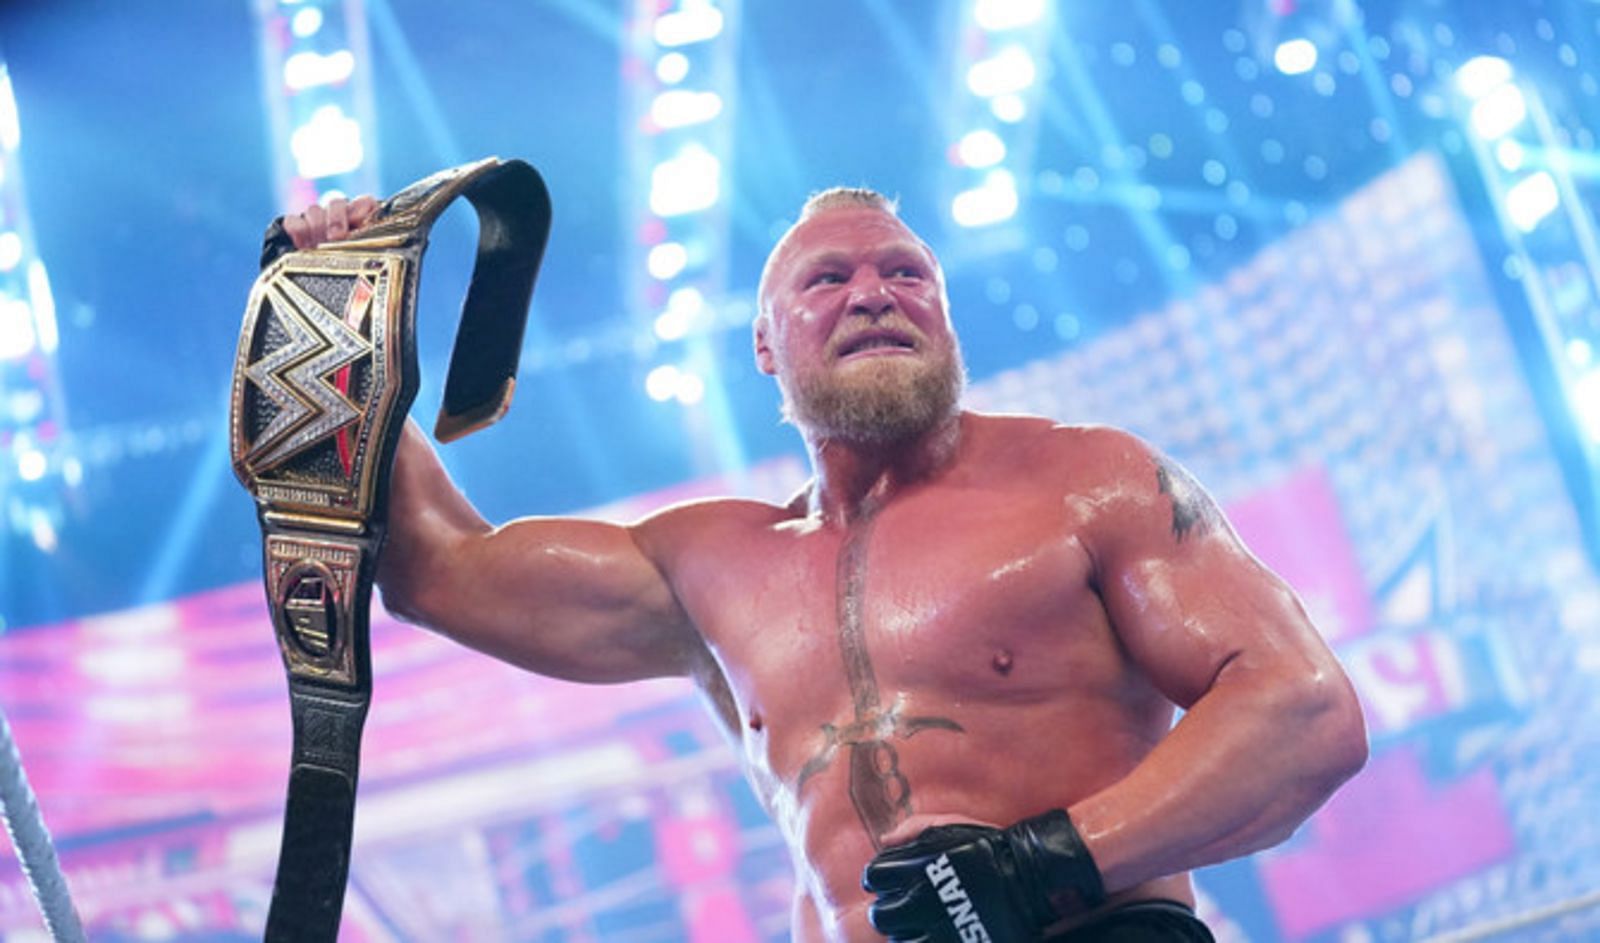 Could Brock Lesnar surprise the fans once again?